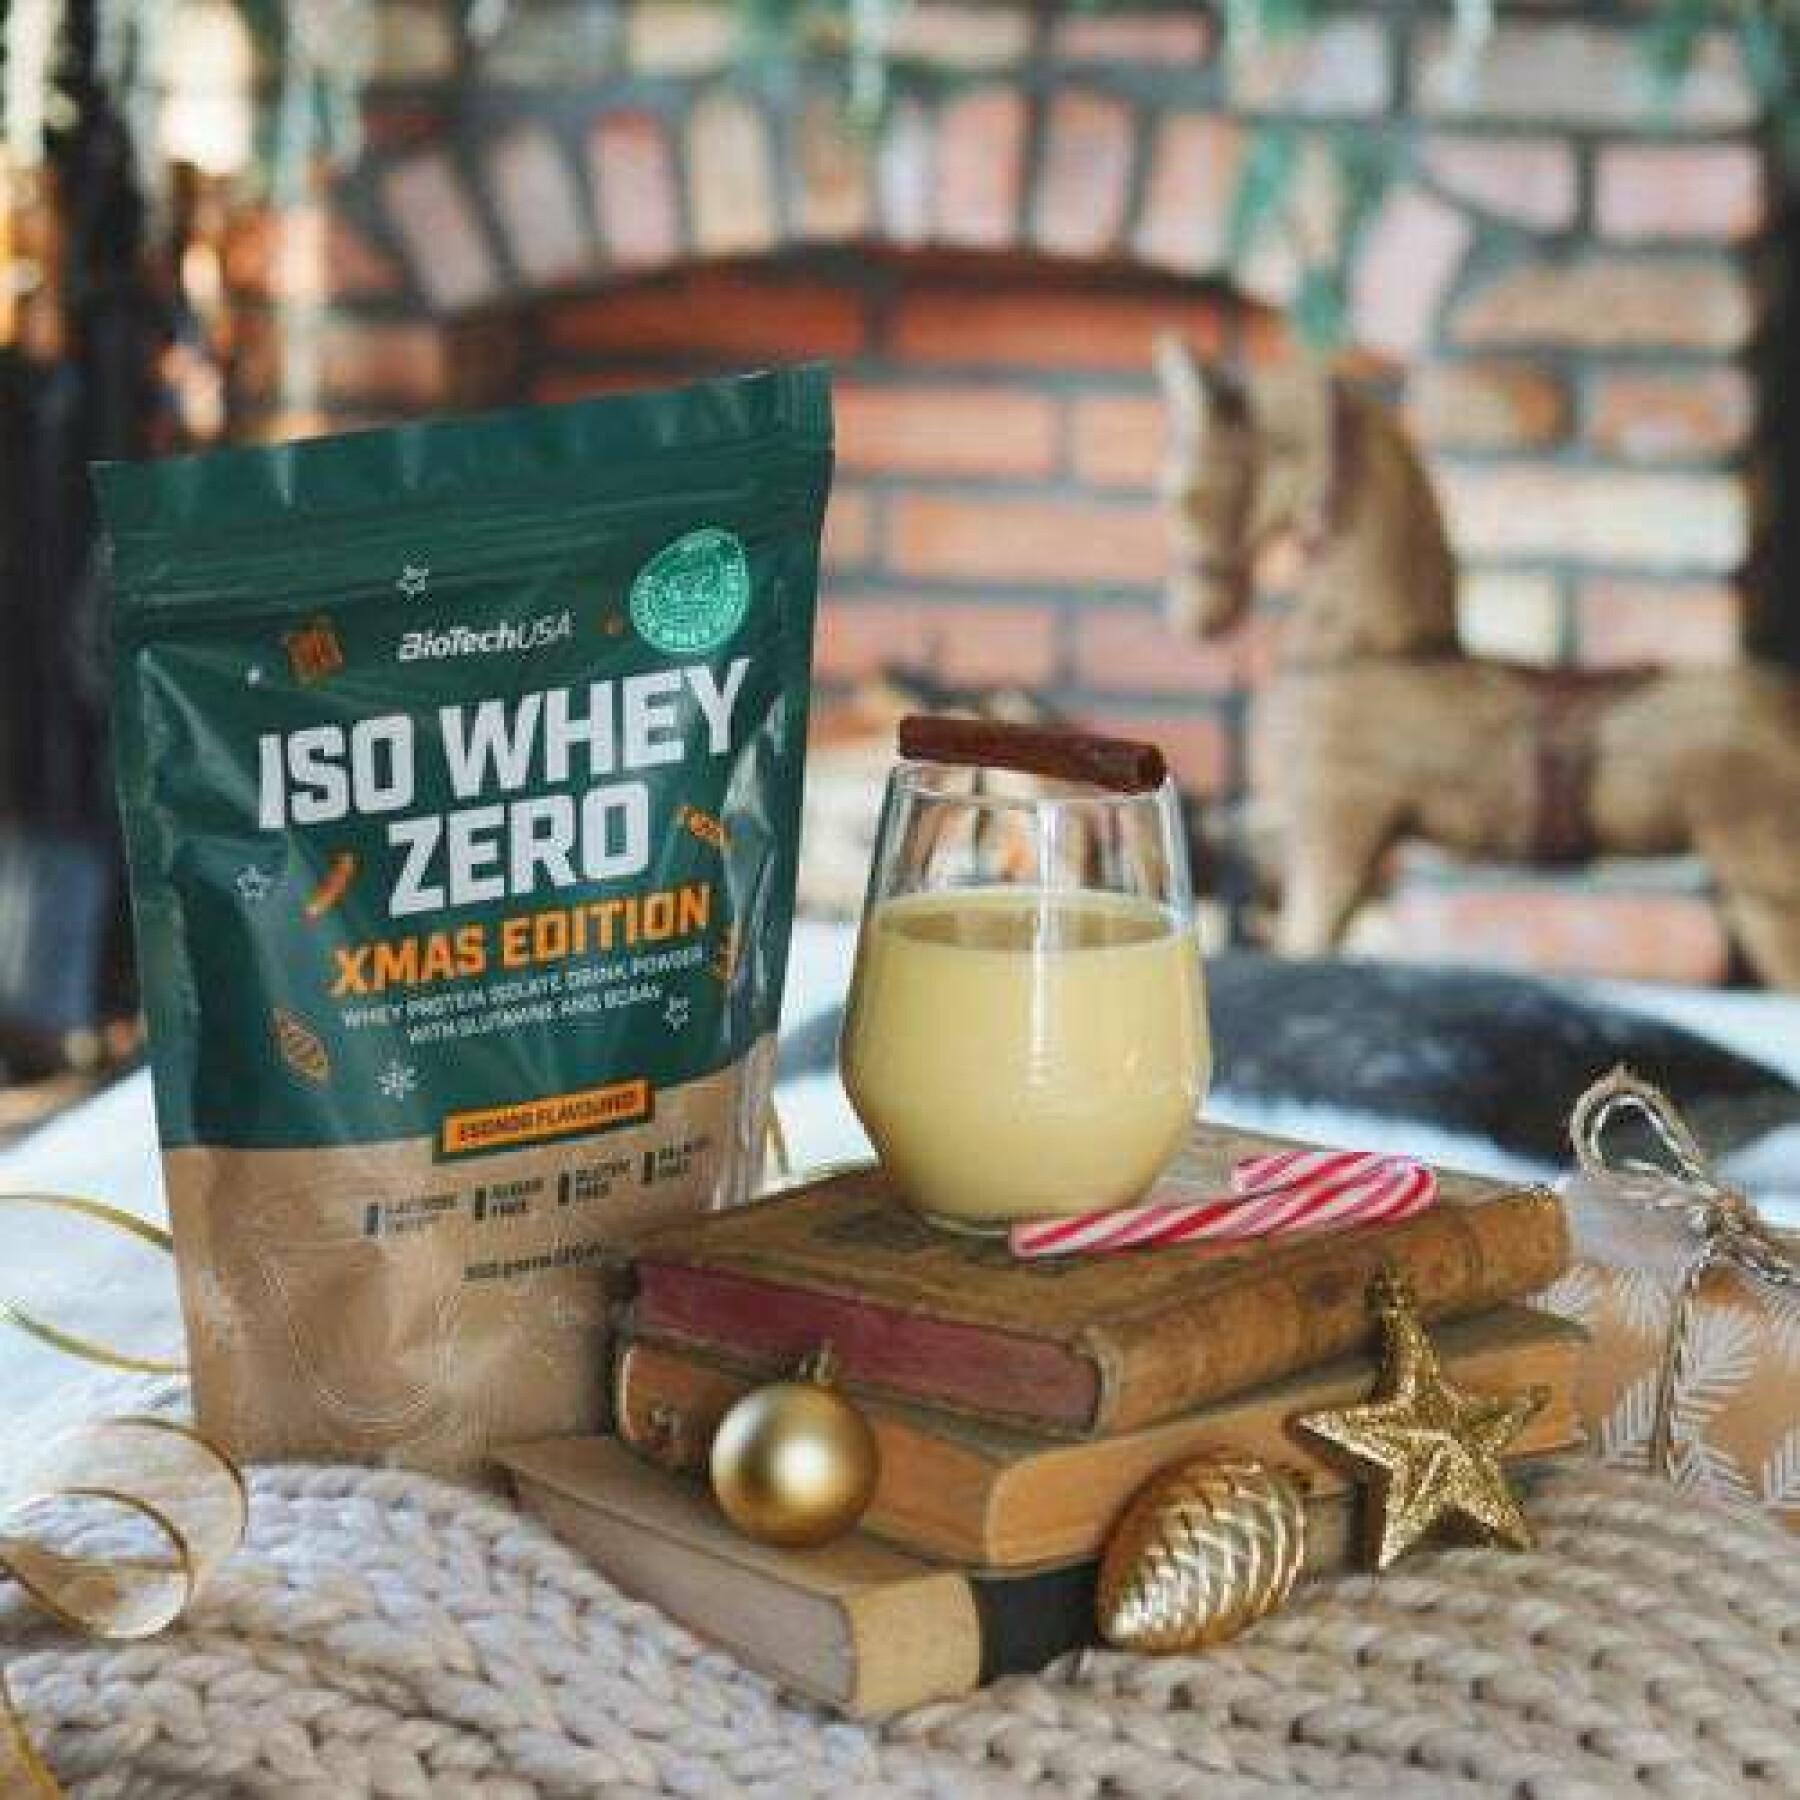 Pack of 10 bags of protein Biotech USA iso whey zero lactose free - Liqueur d'œuf - 500g